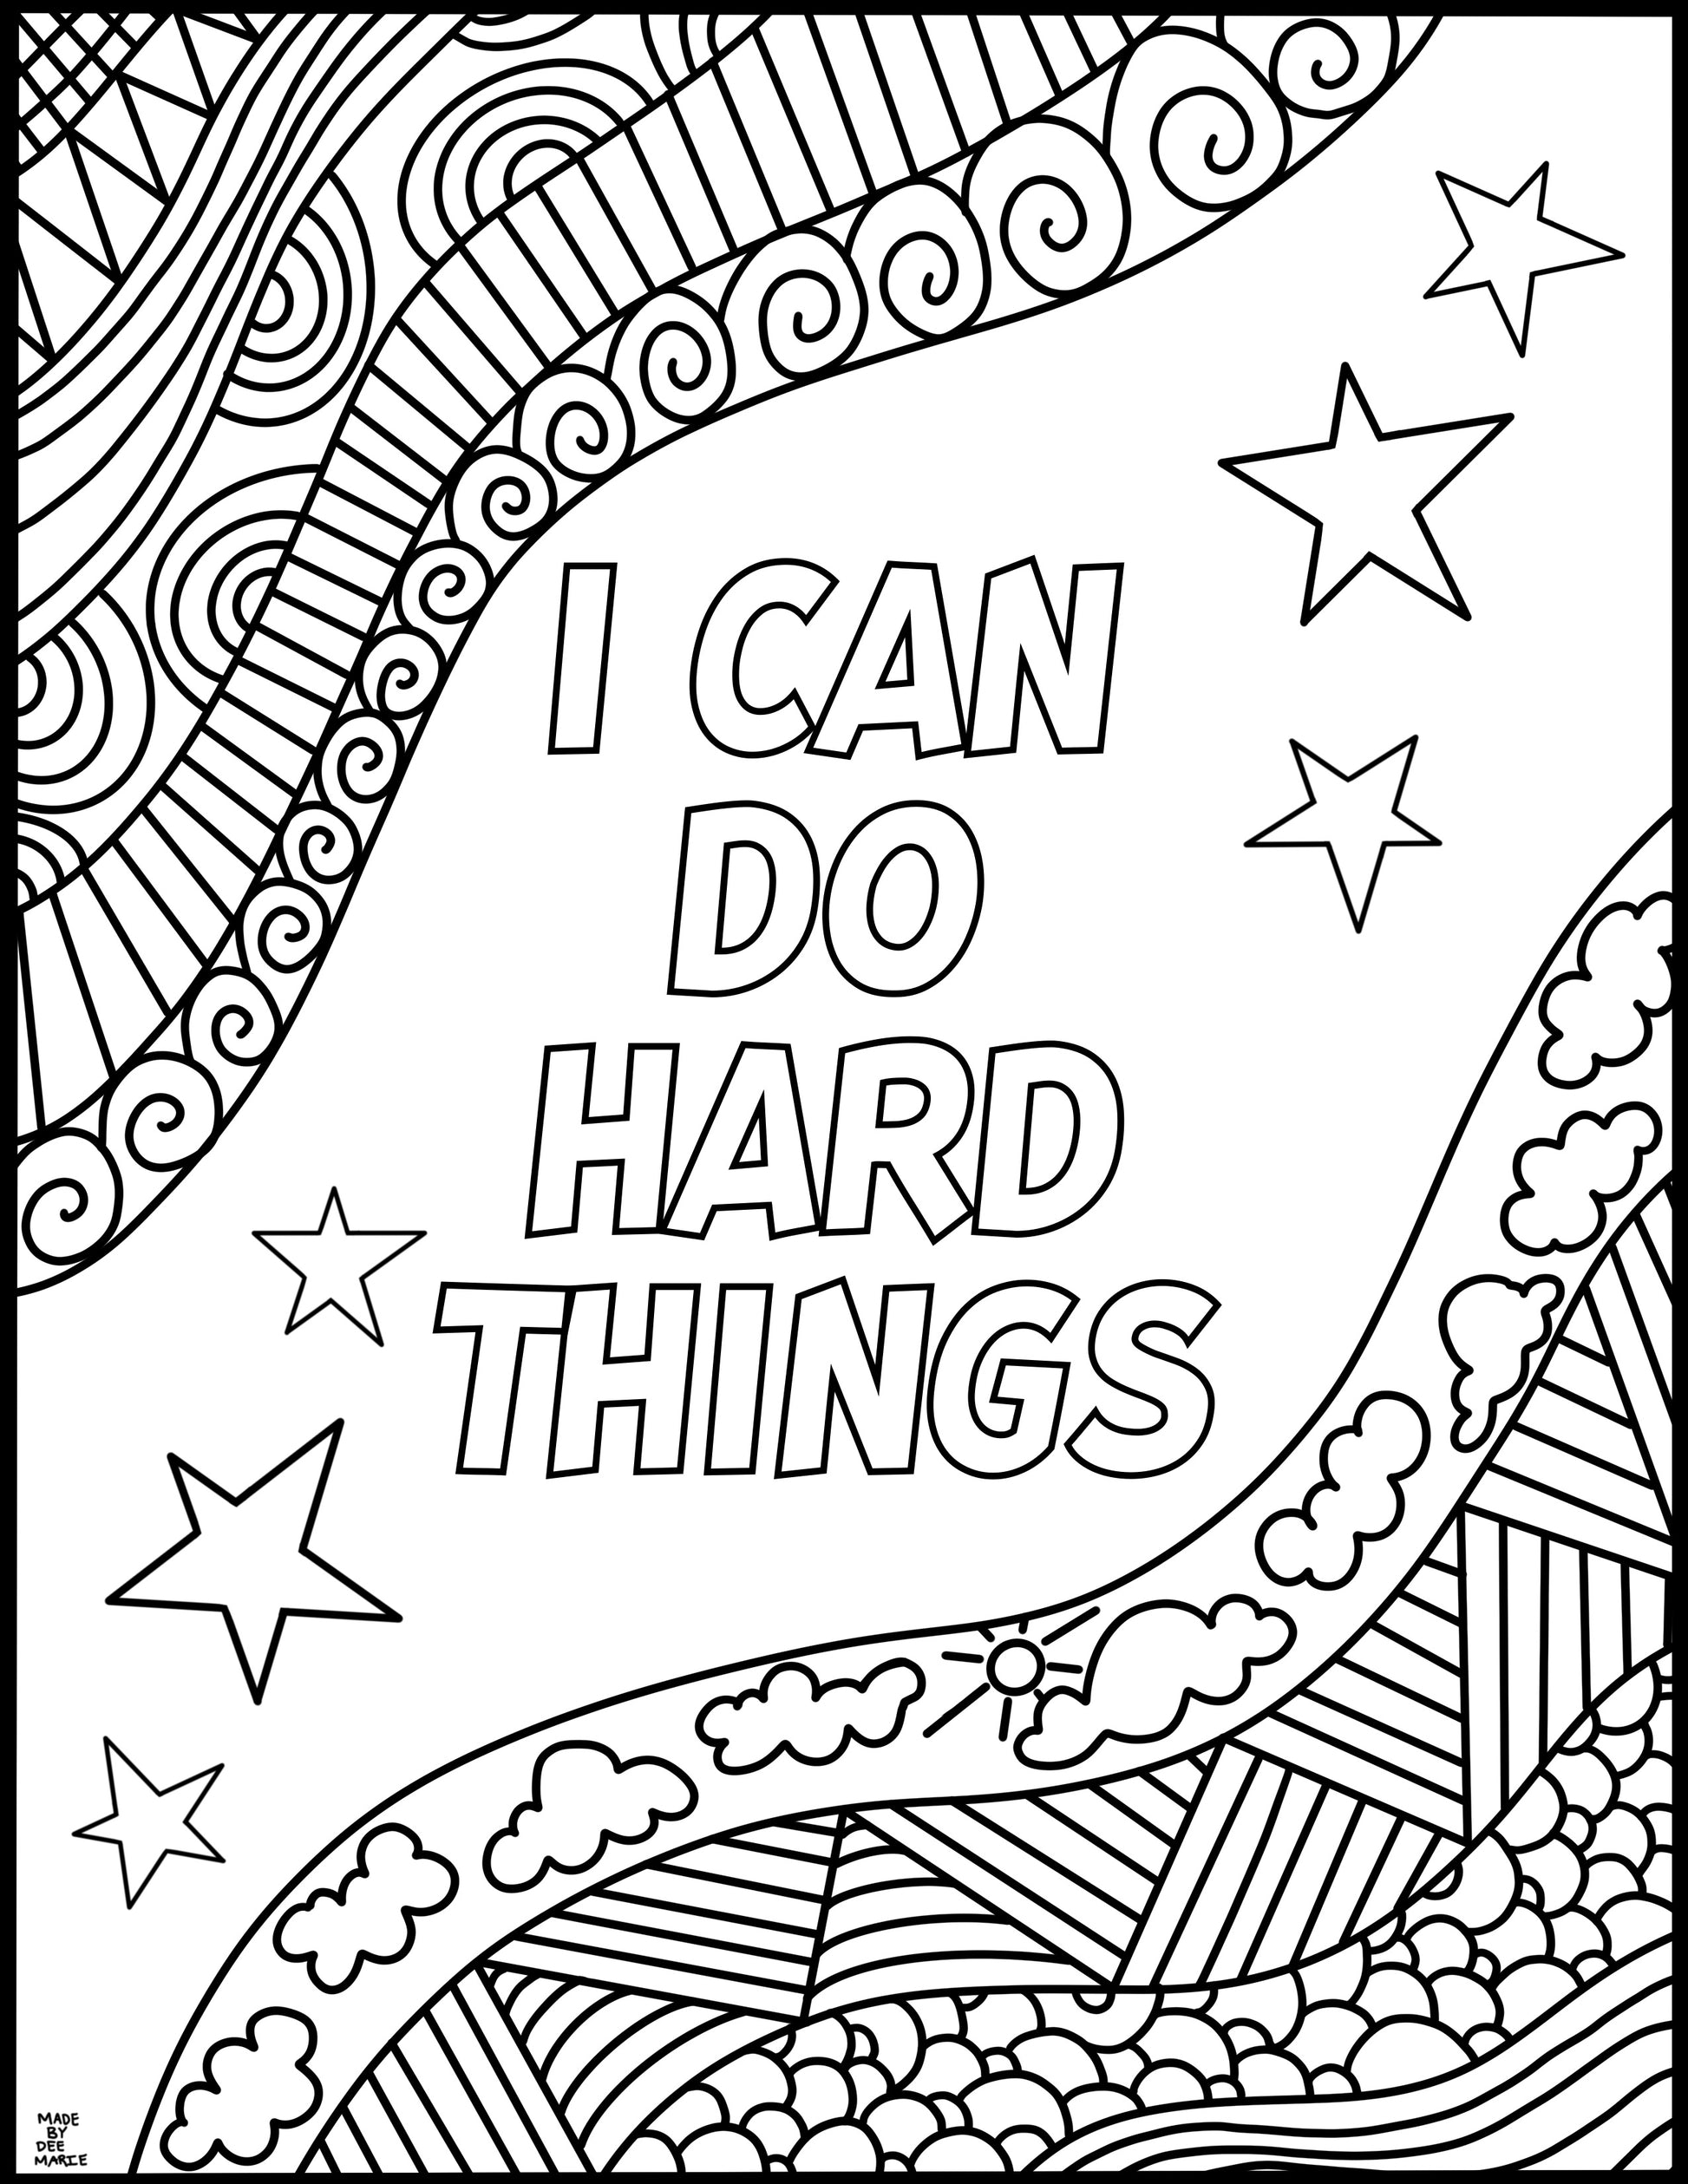 I Can Do Hard Things Coloring Page – madebydeemarie